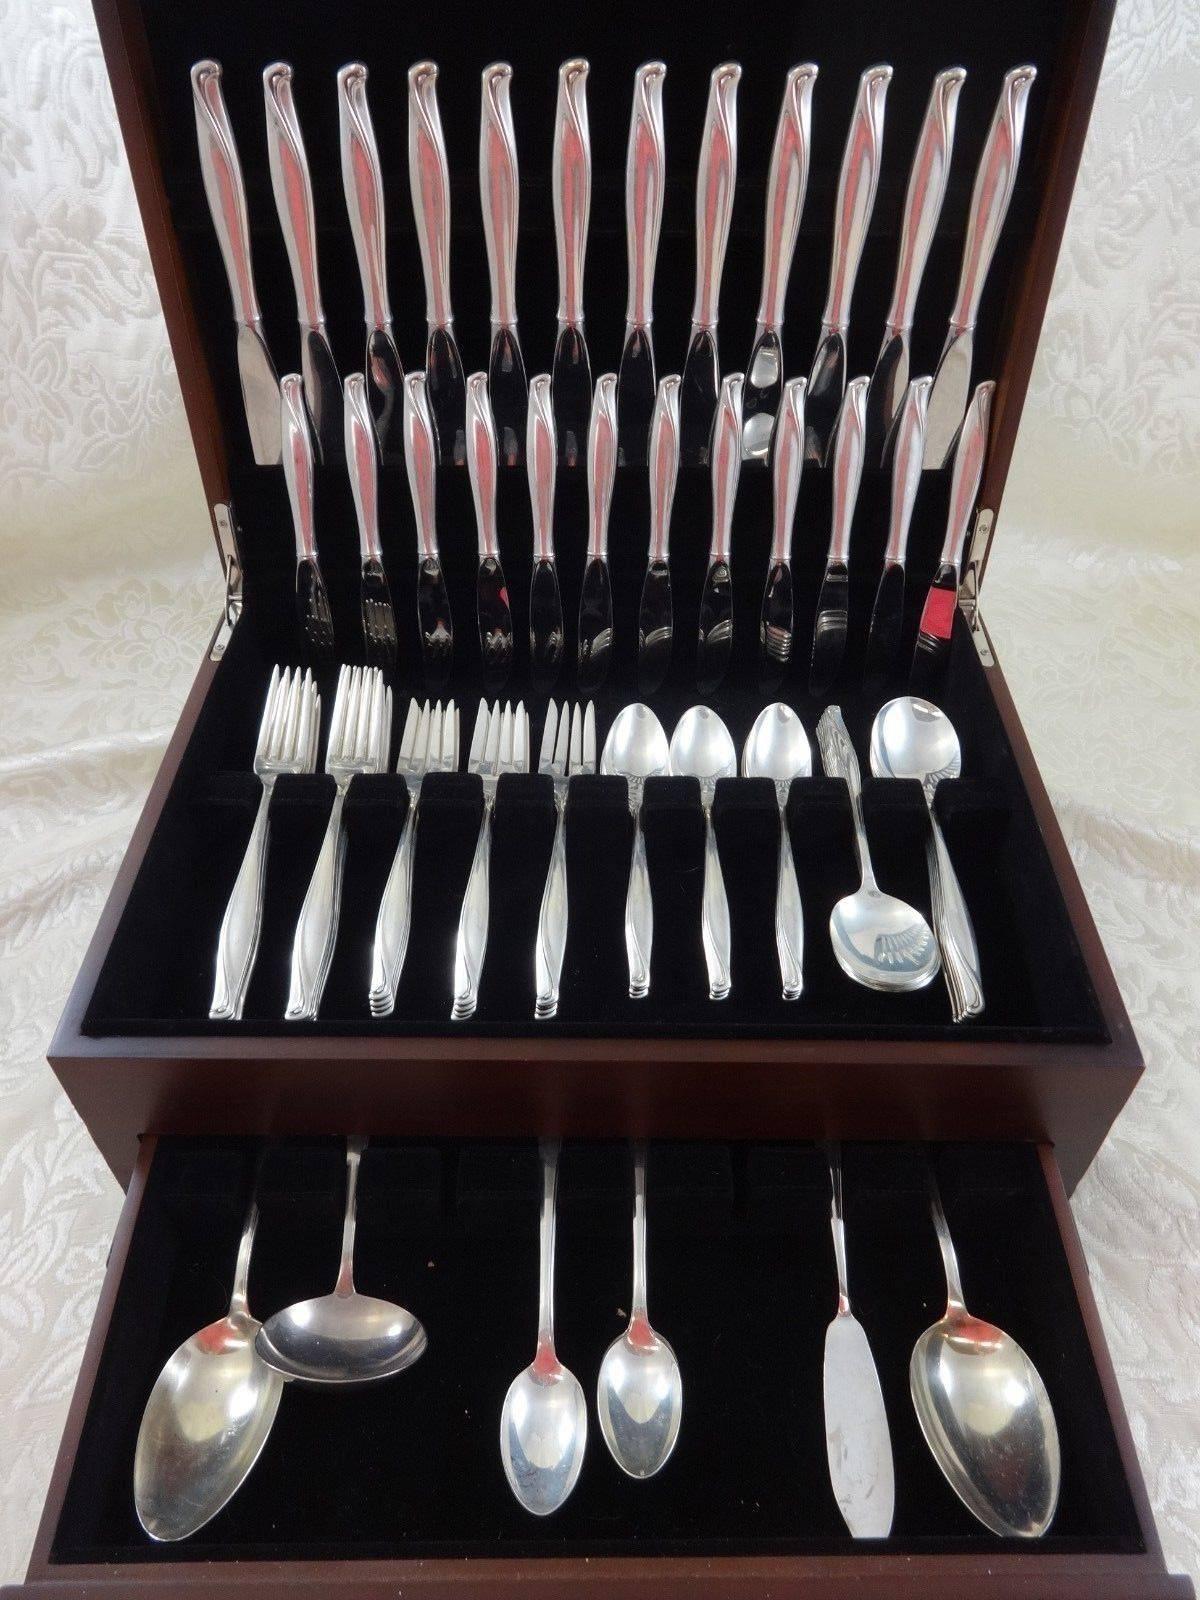 Beautiful spring bud by Alvin sterling silver flatware set for 12 - 88 pieces. This set has a great flowing modern design! This set includes:

12 knives, 9